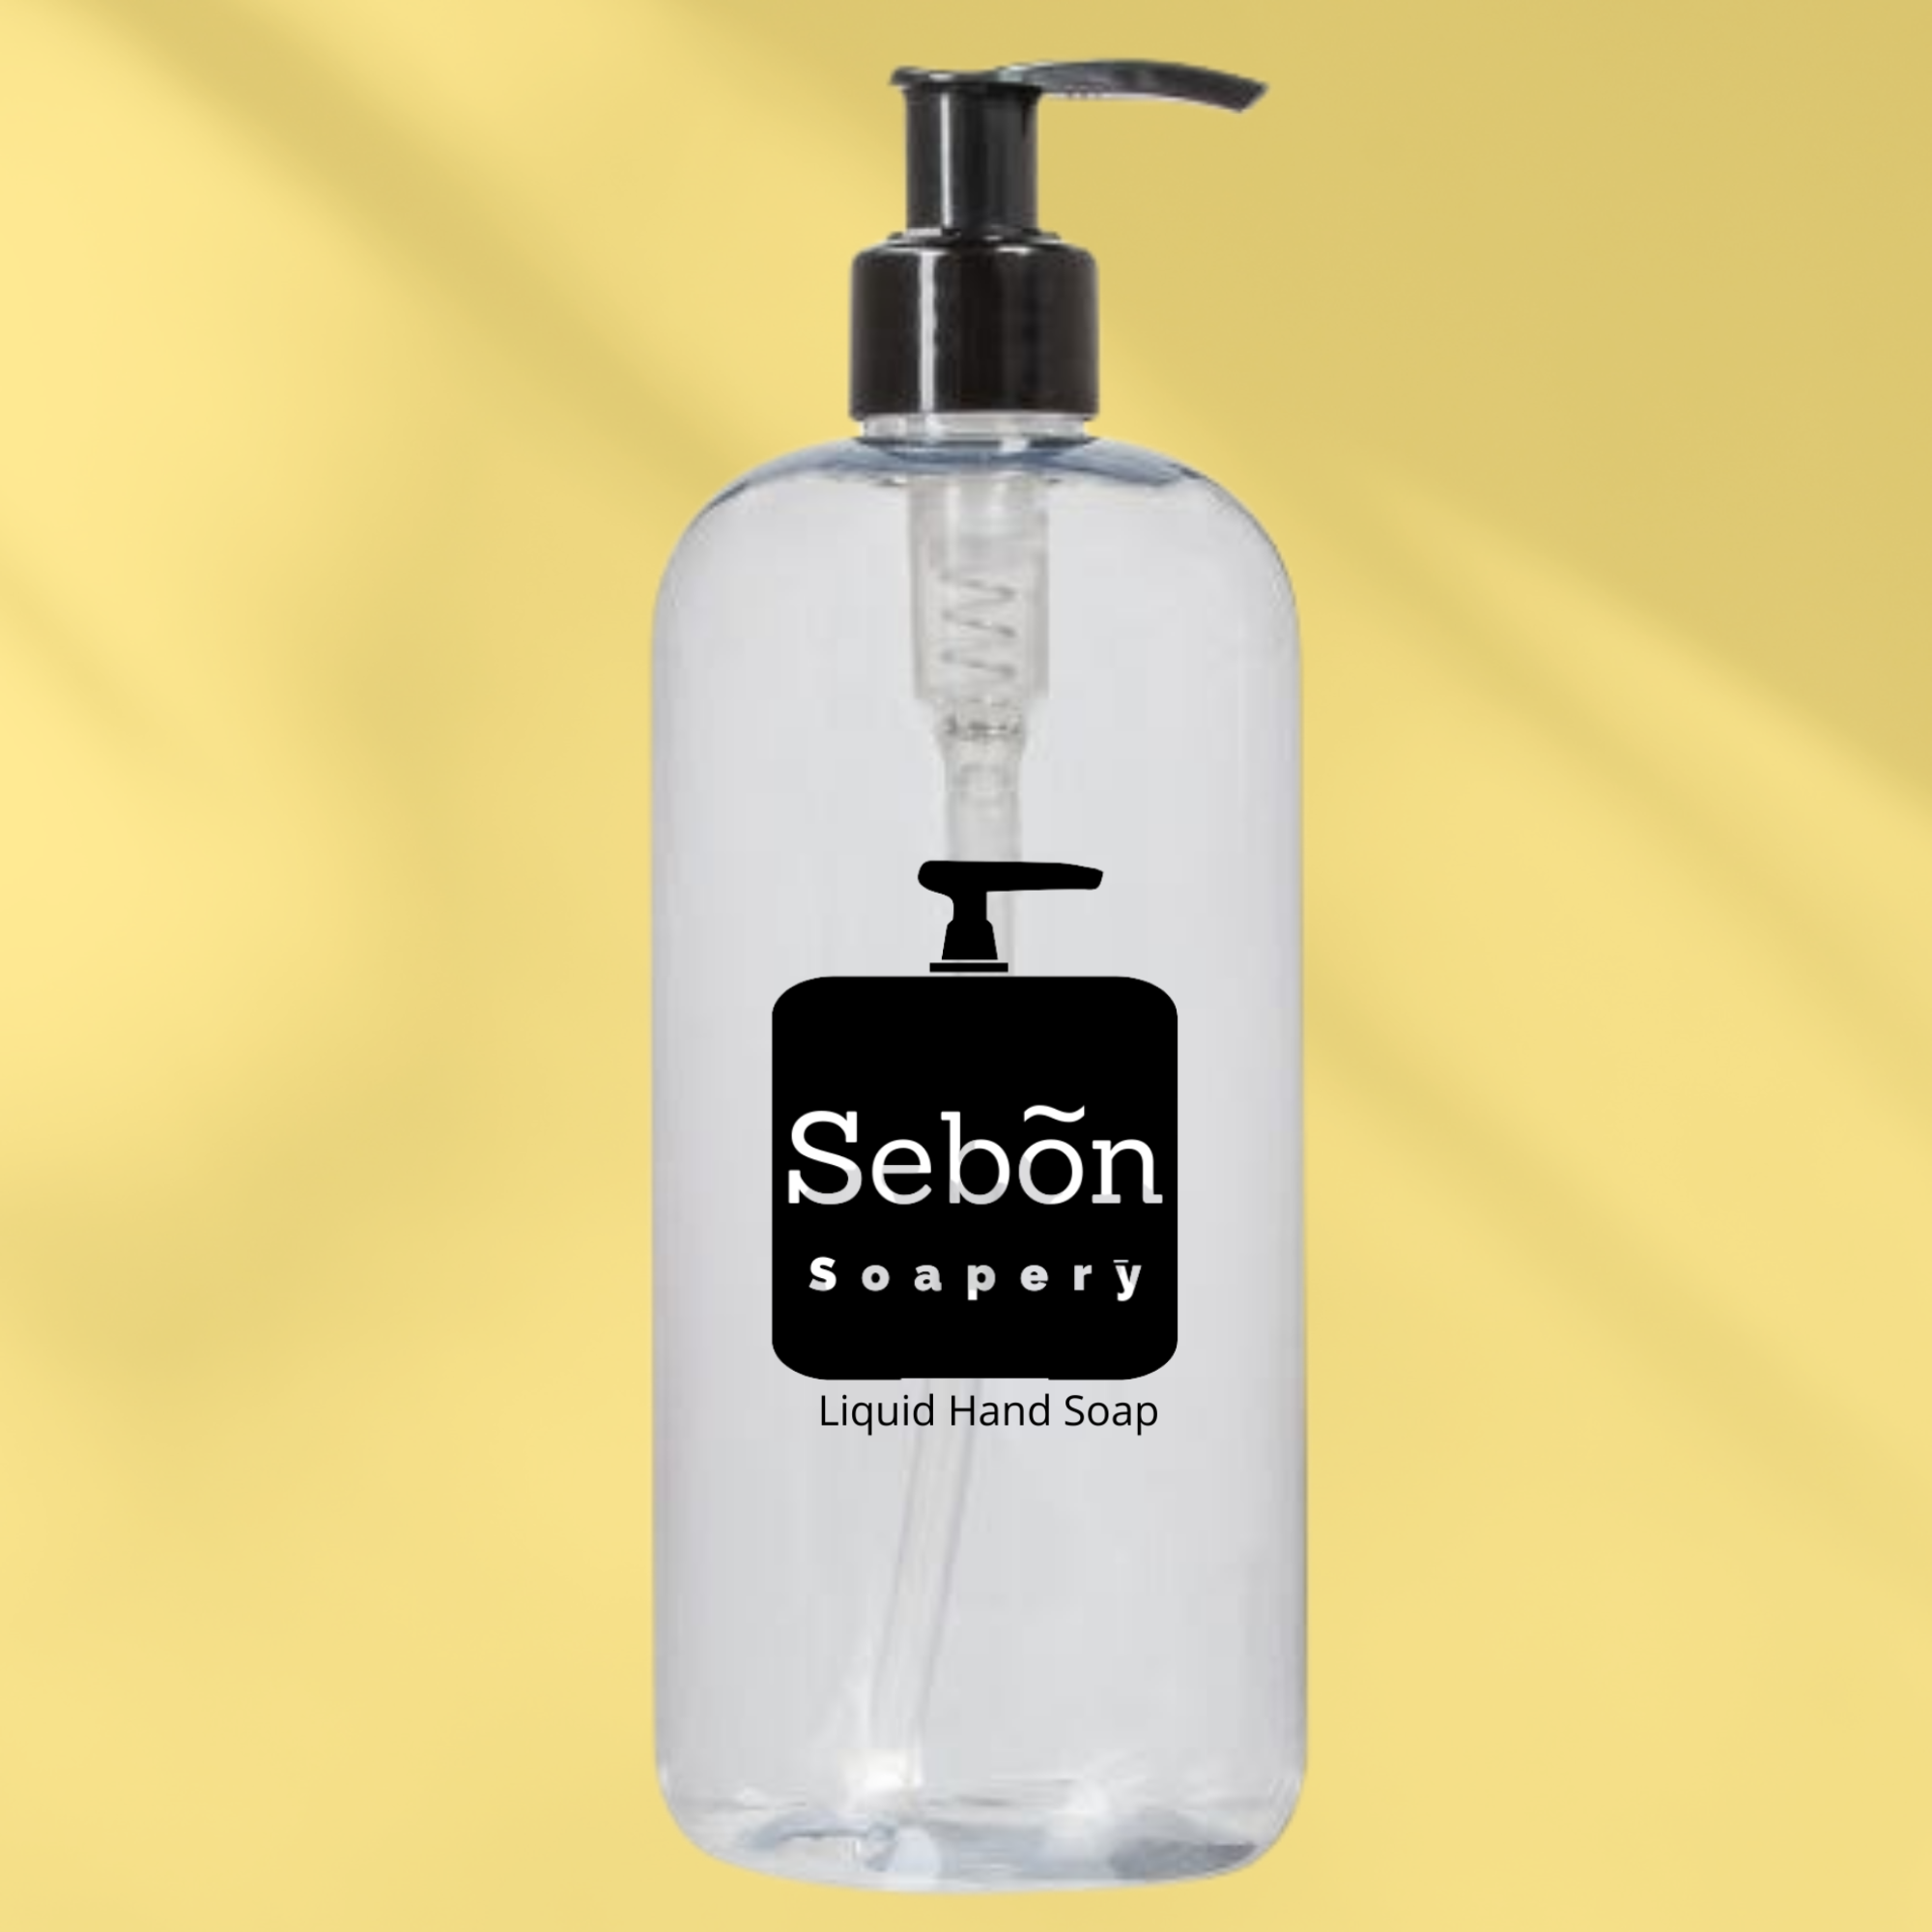 Sebon Chocolate Covered Cinnamon Bears Scented Liquid Hand Soap with Olive Oil